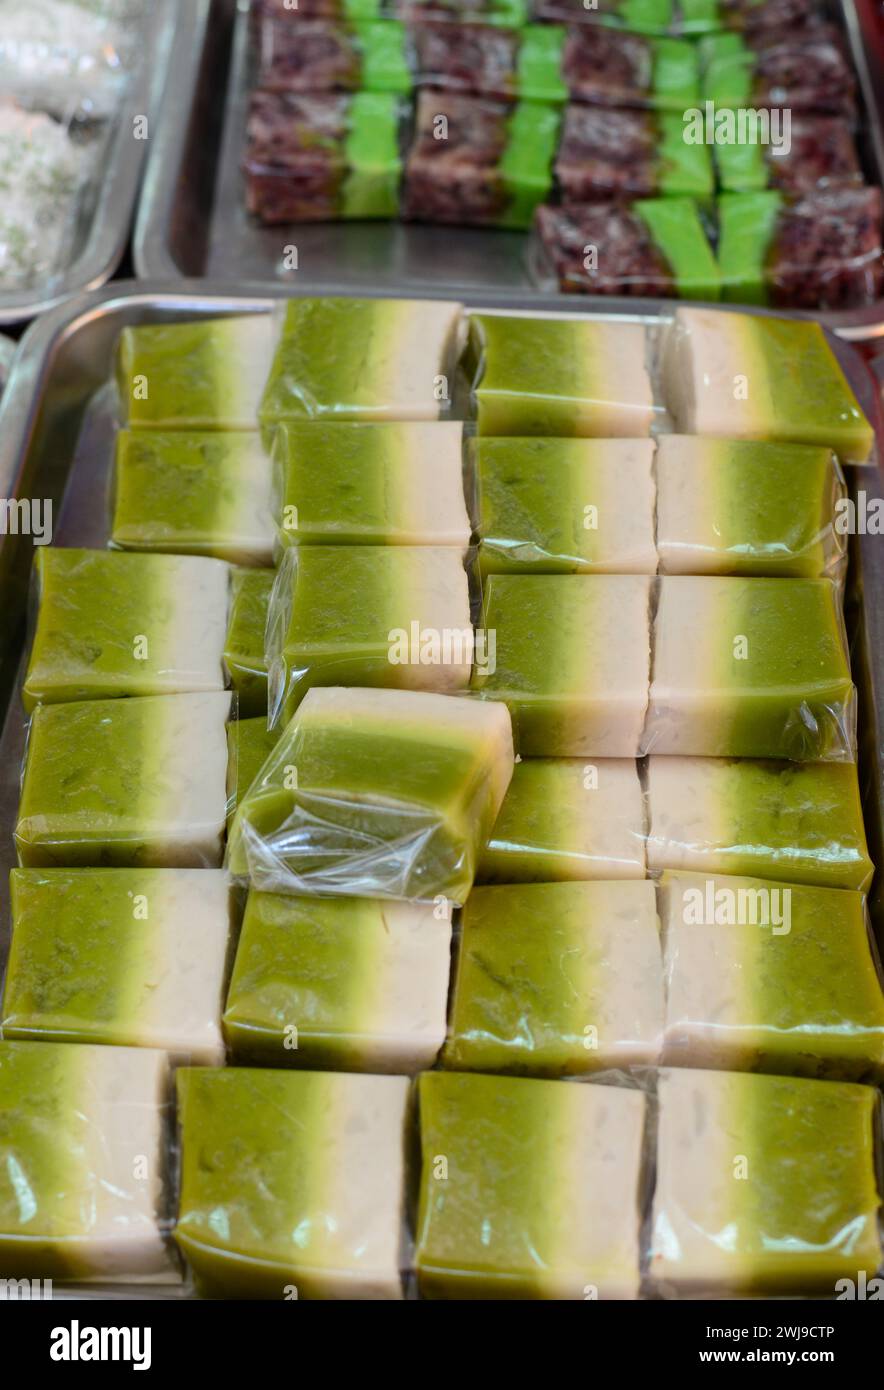 Seri Muka is a two-layered dessert with steamed glutinous rice forming the bottom half and a green custard layer made with pandan juice & coconut milk Stock Photo